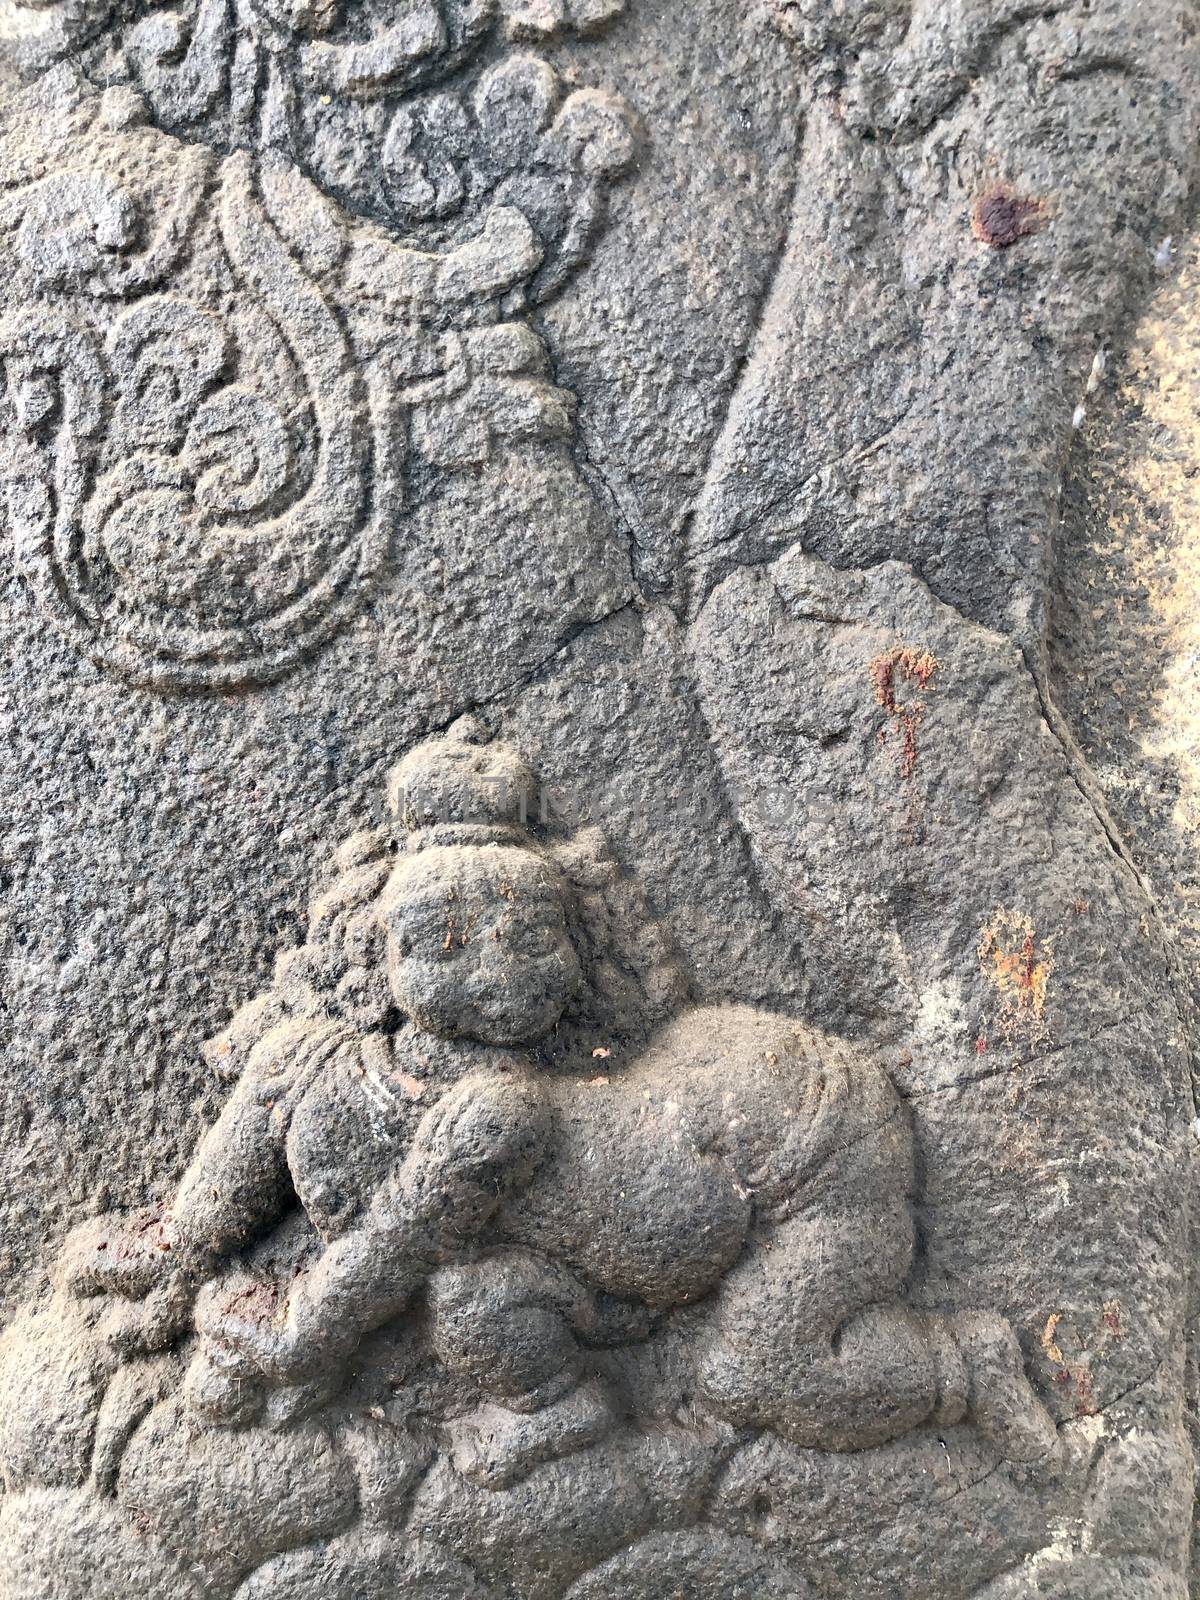 Sculpture of a baby lying in the bottom of a tree. Bas relief sculpture carved in the stone walls of Shiva temple in Tamil nadu. by prabhakaran851